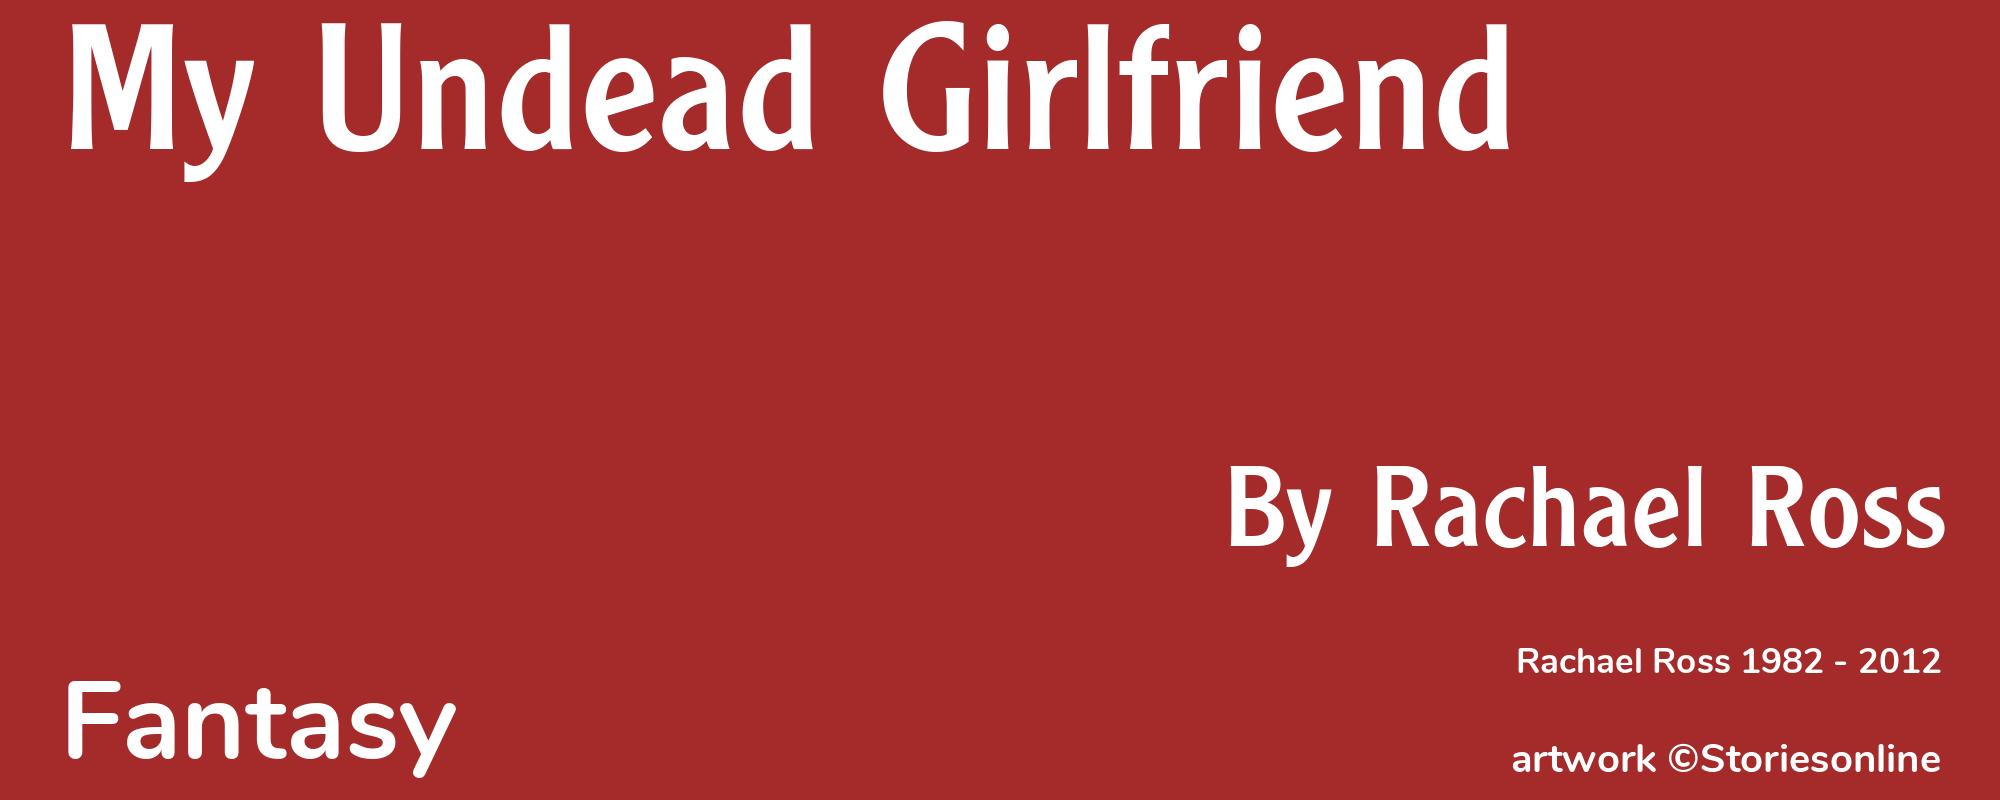 My Undead Girlfriend - Cover